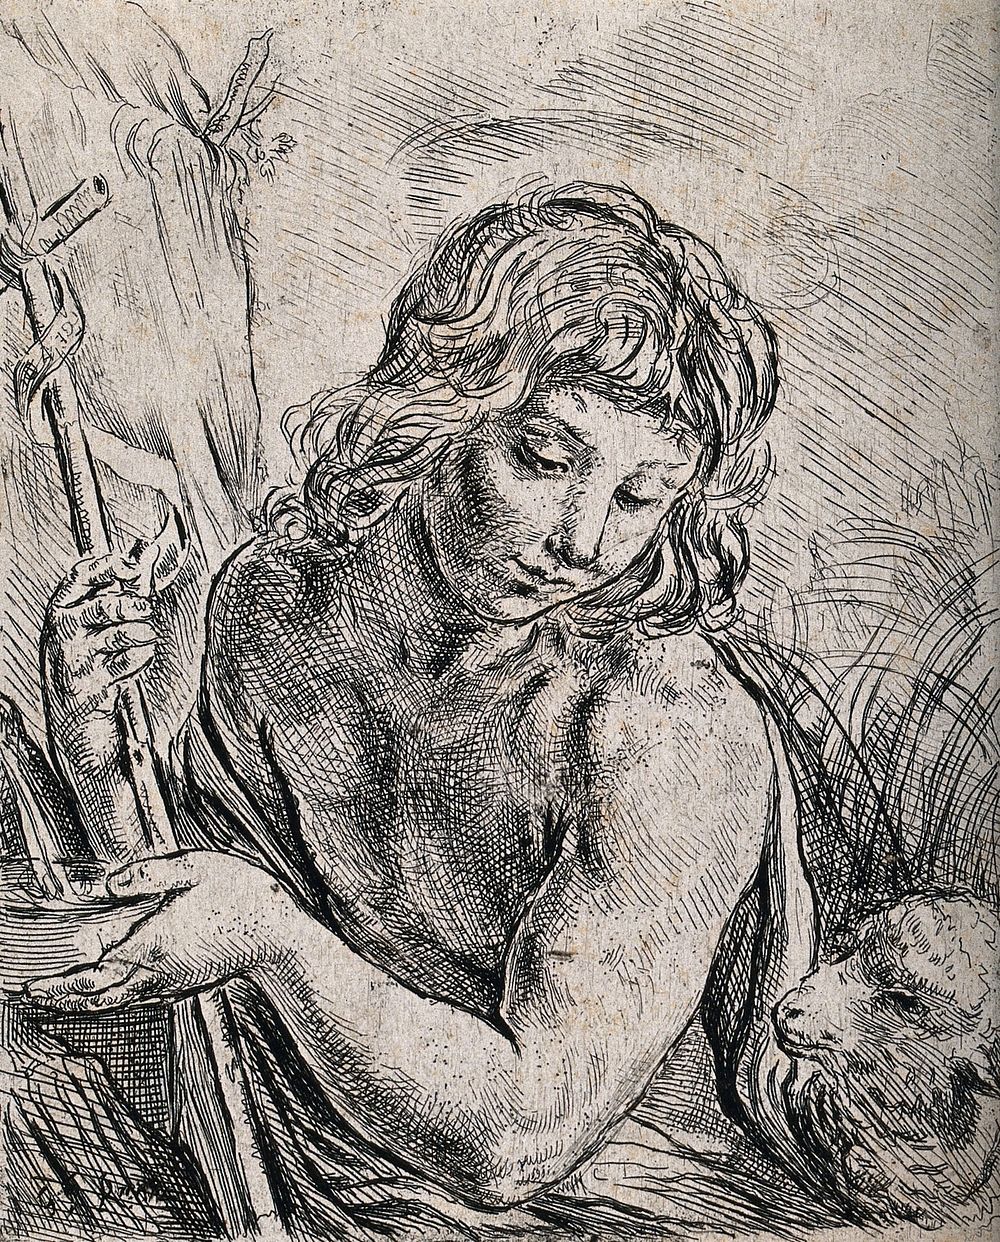 Saint John the Baptist in the wilderness, next to a spring of water. Etching by Girolamo Rossi after G. Reni.